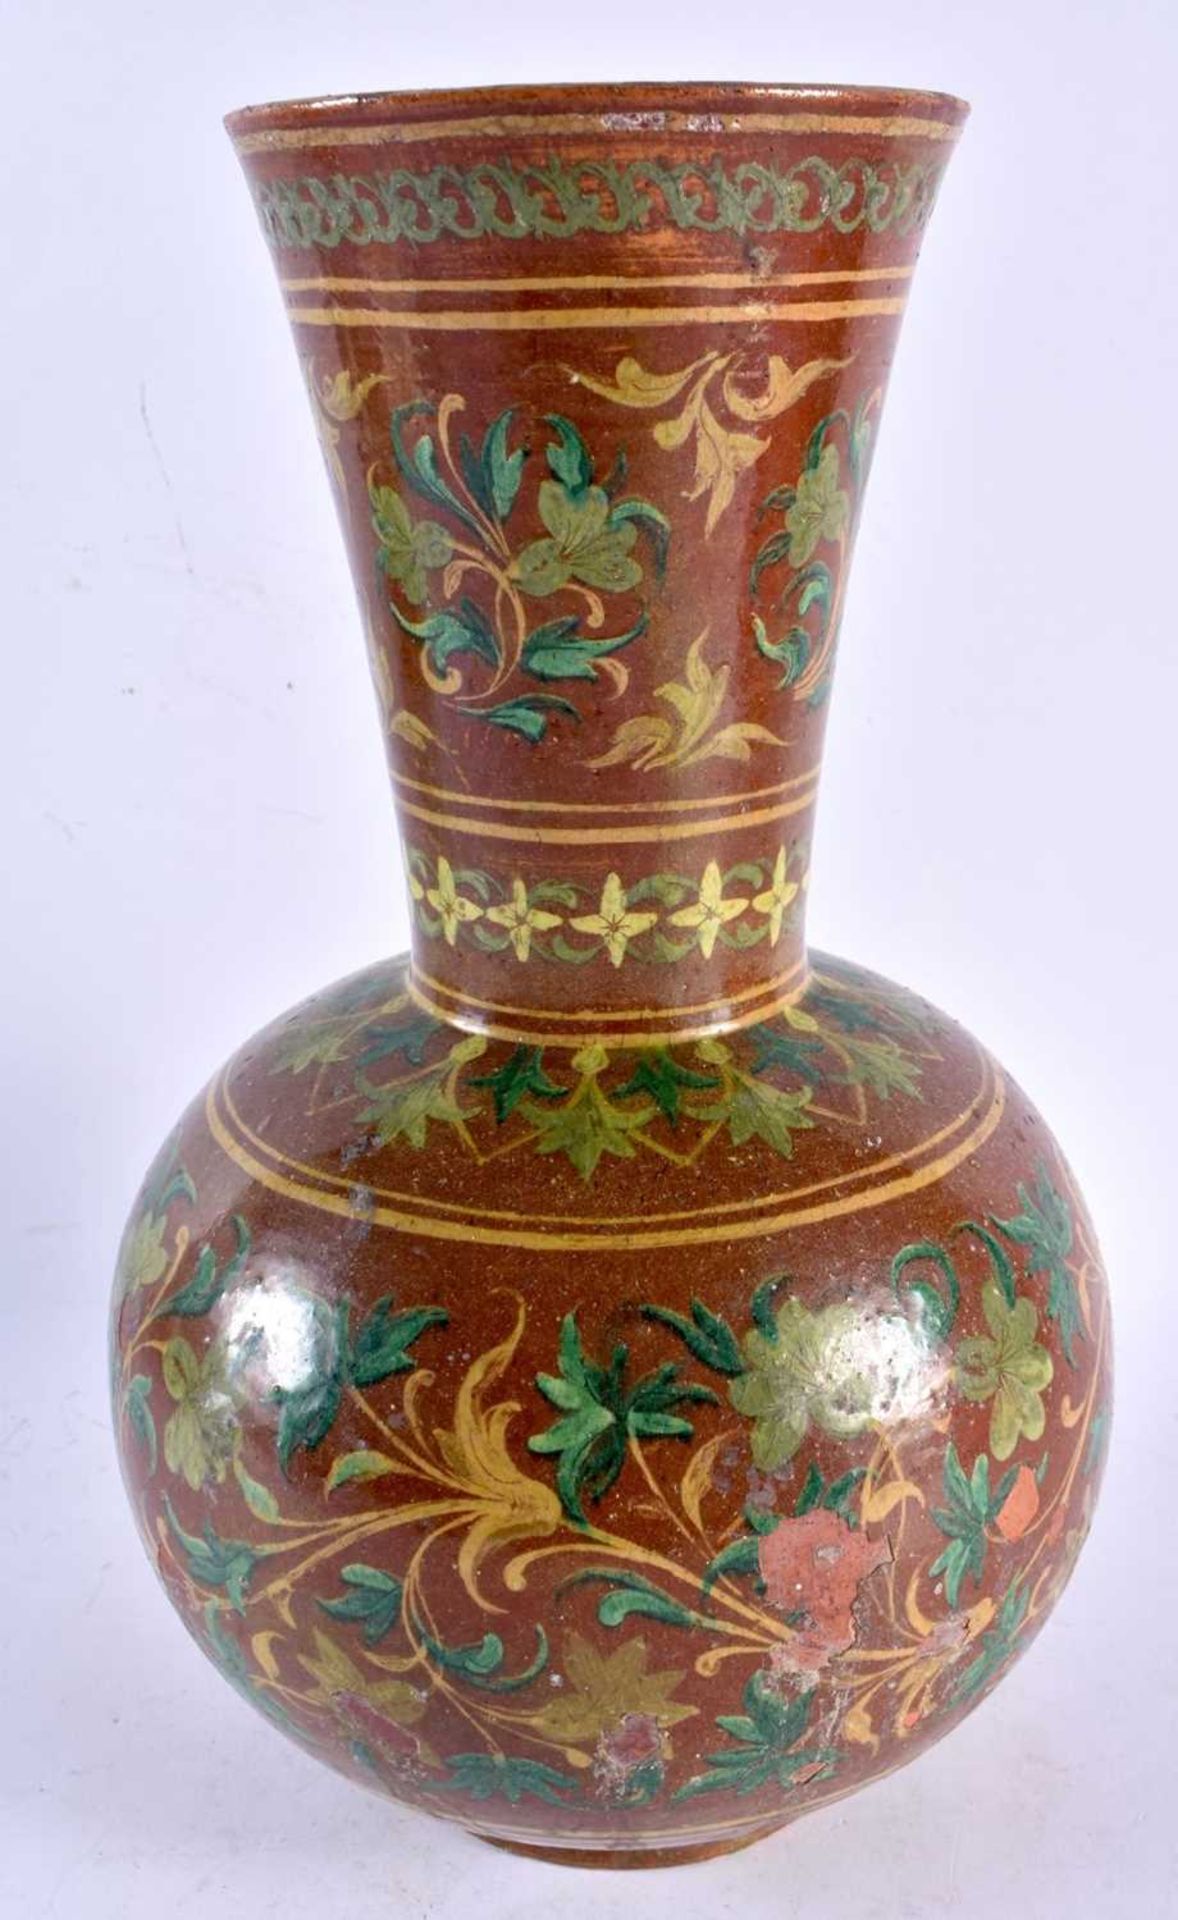 A FINE 19TH CENTURY MIDDLE EASTERN ISLAMIC INDIAN POTTERY VASE painted with stylised flowers in - Image 3 of 5